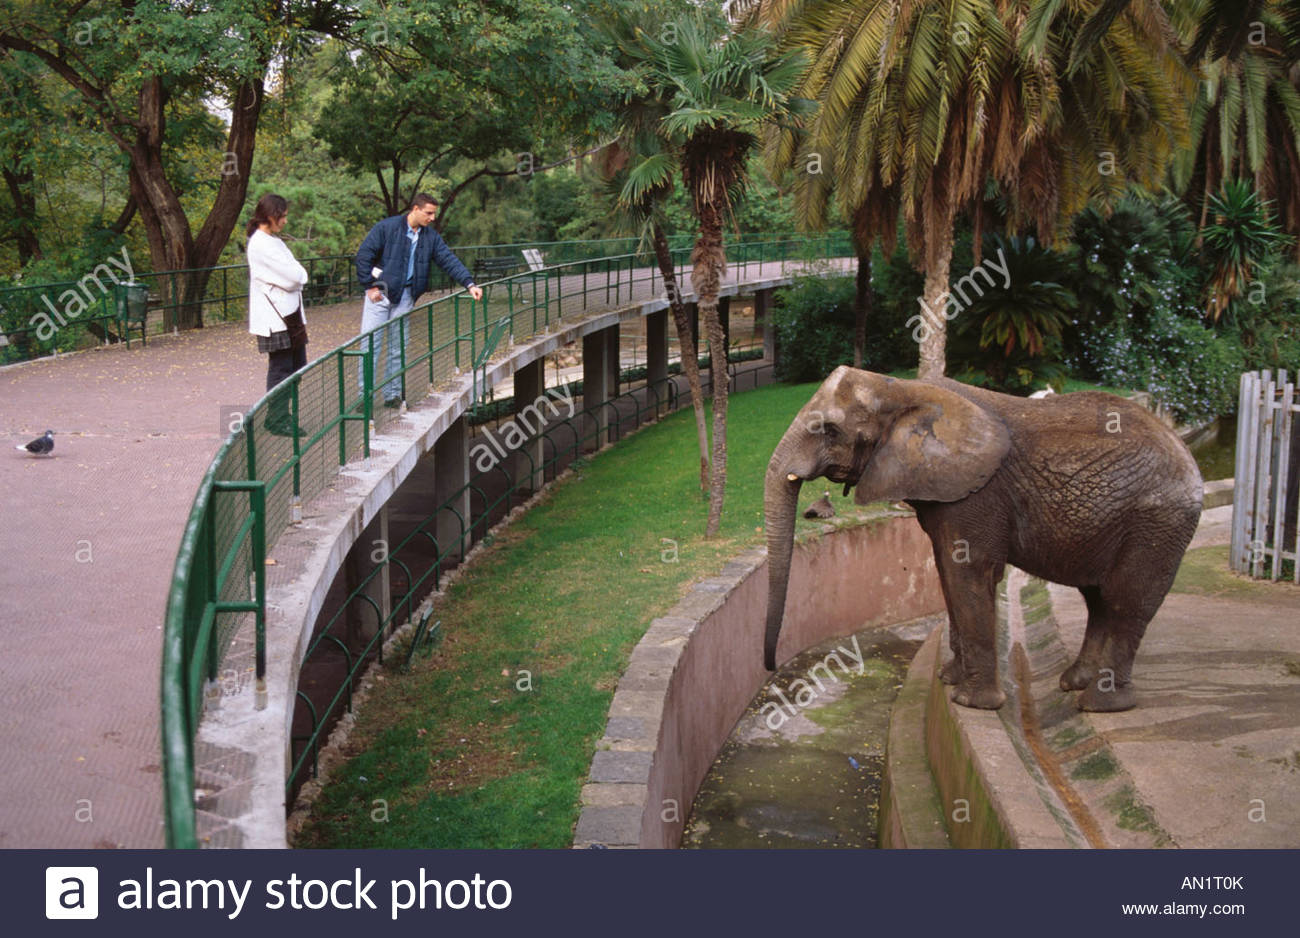 visitors-at-zoo-standing-outside-elephant-enclosure-looking-at-elephant-AN1T0K.jpg